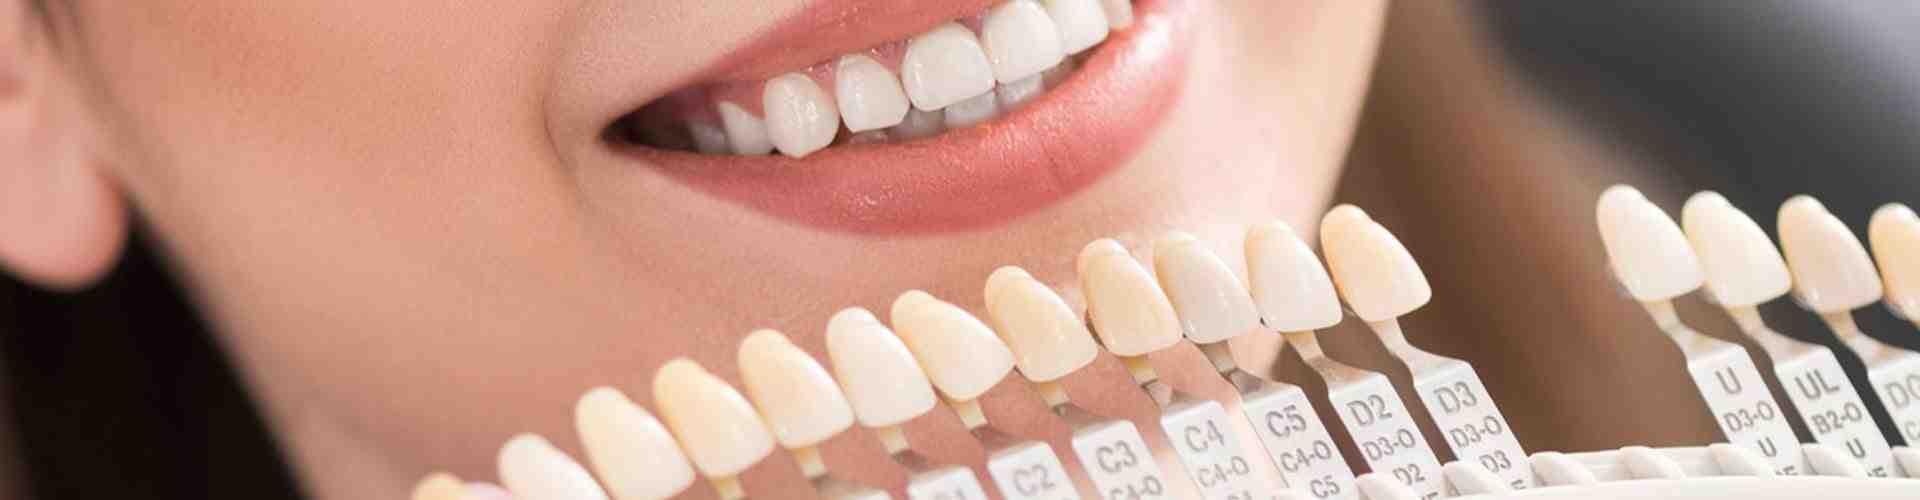 How Much Does a full dental makeover cost?